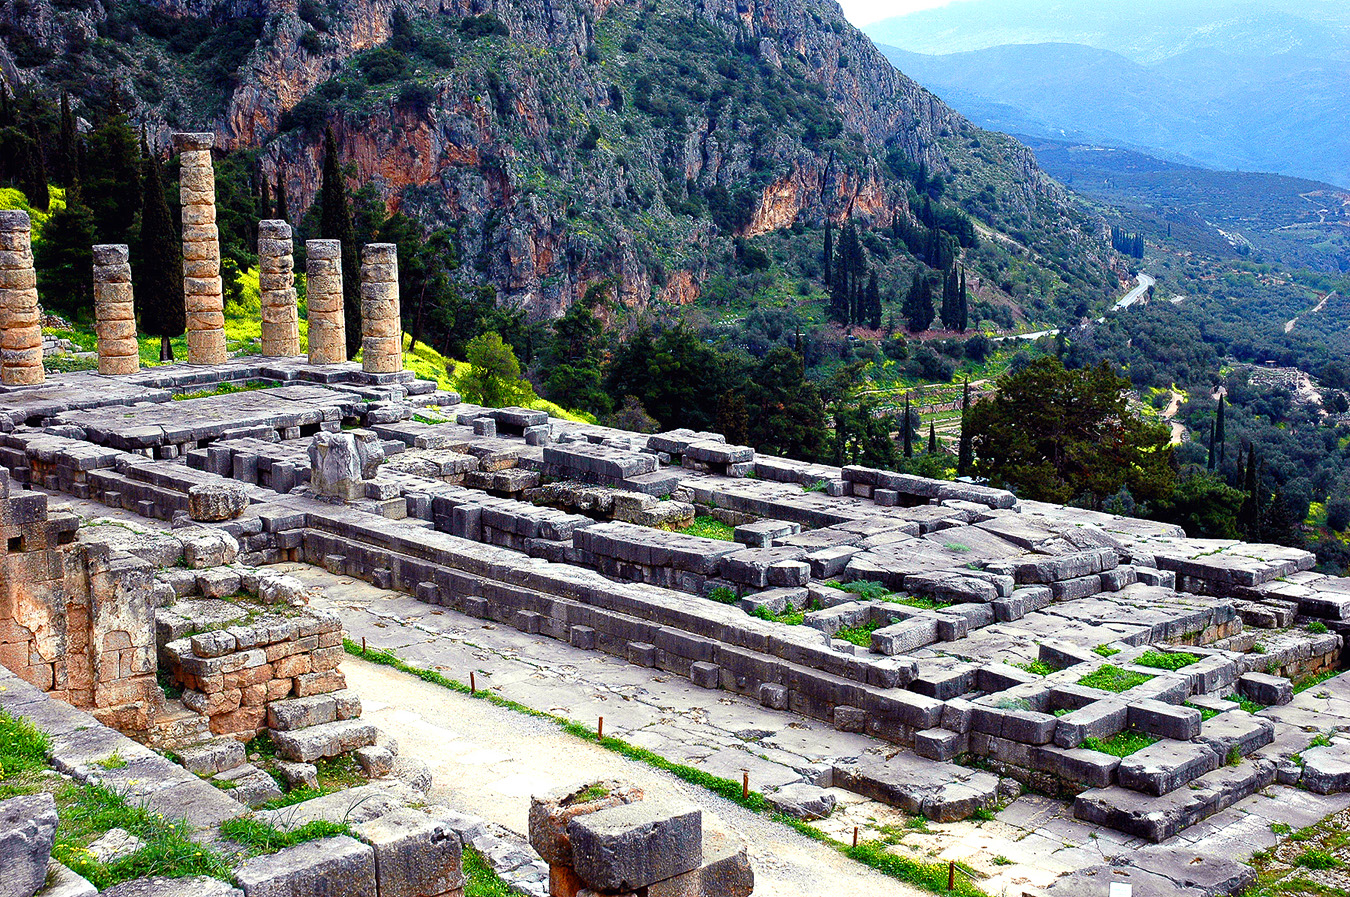 SITE OF THE ANCIENT ORACLE OF DELPHI